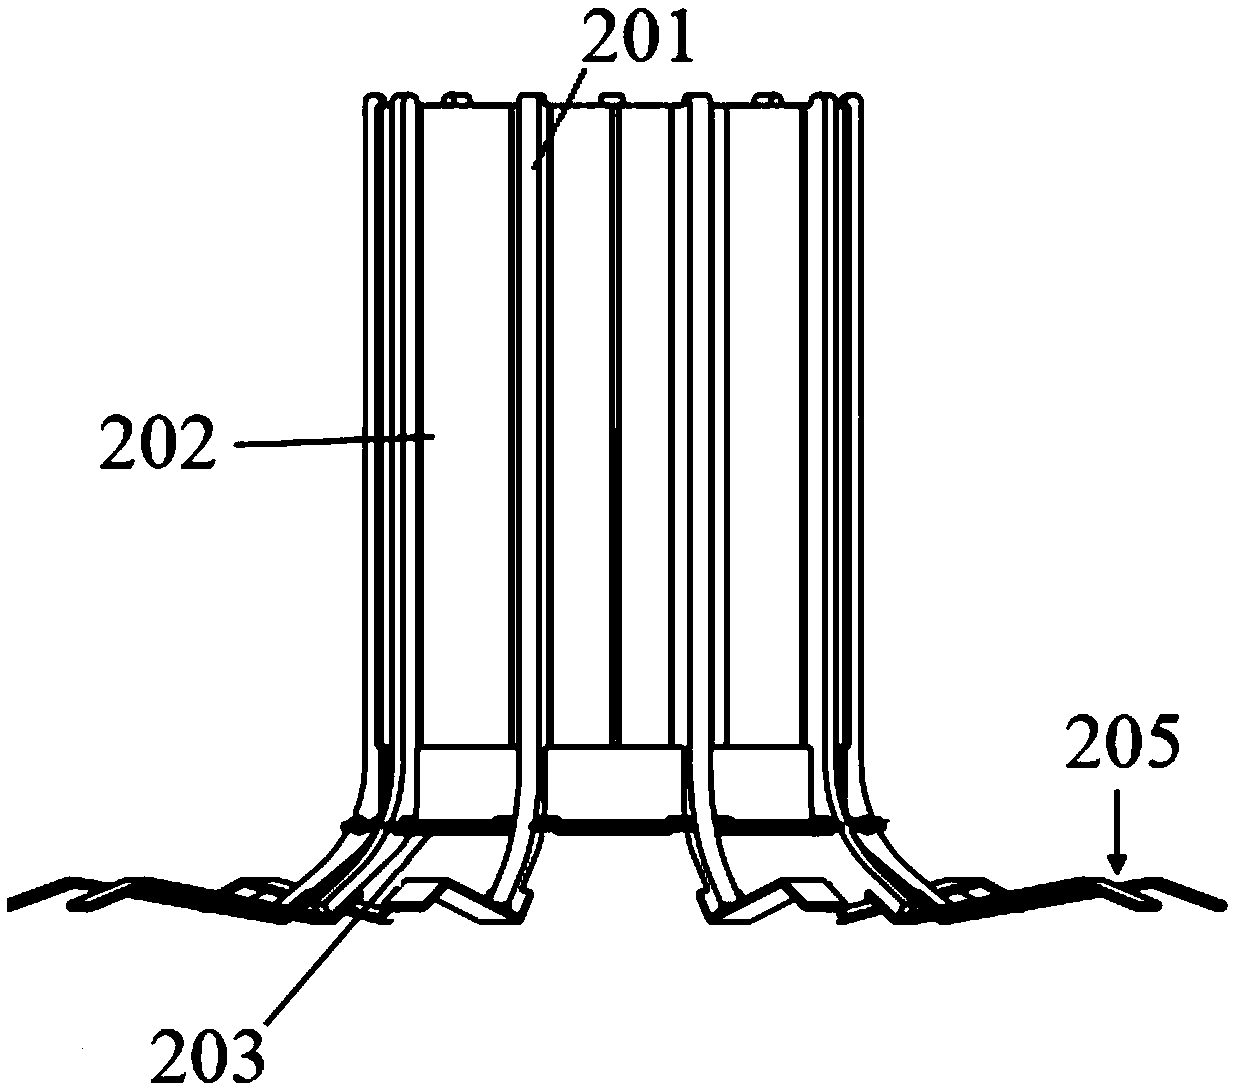 Auto-expanding focusing electrodes and photomultiplier tubes for photomultiplier tubes